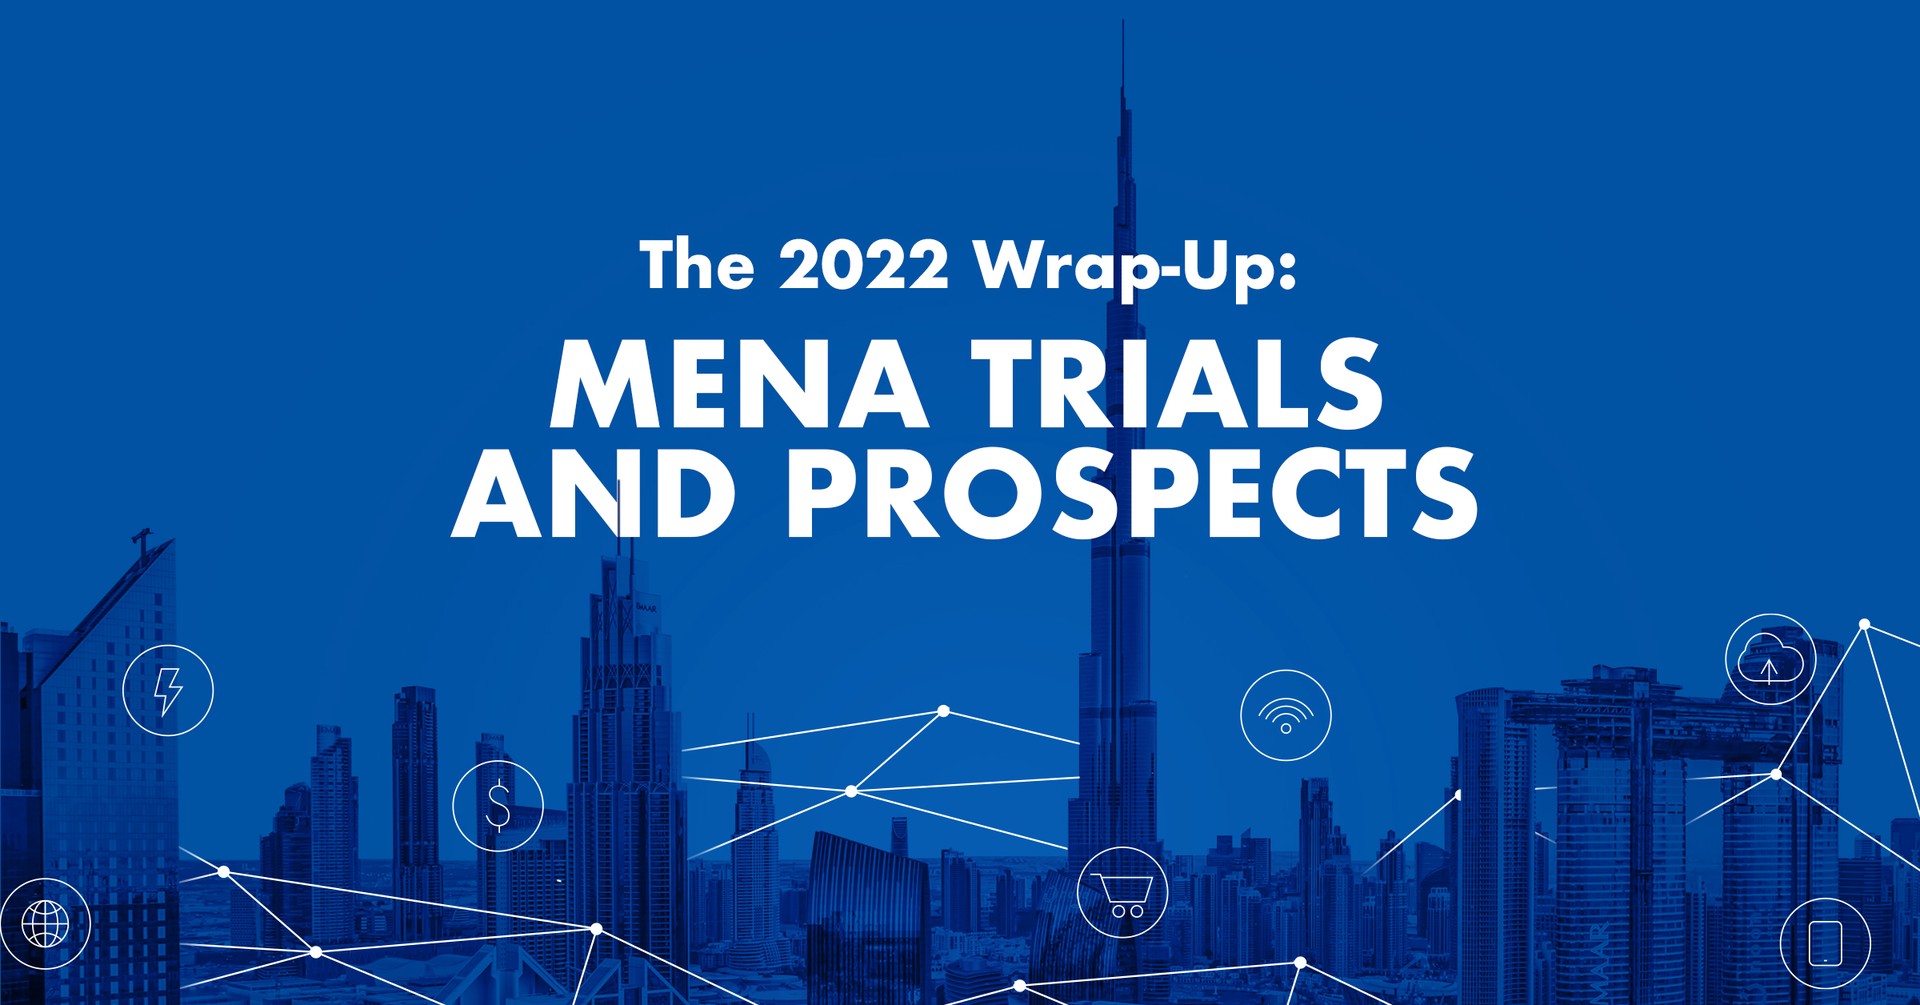 The 2022 Wrap-Up: MENA Trials and Prospects